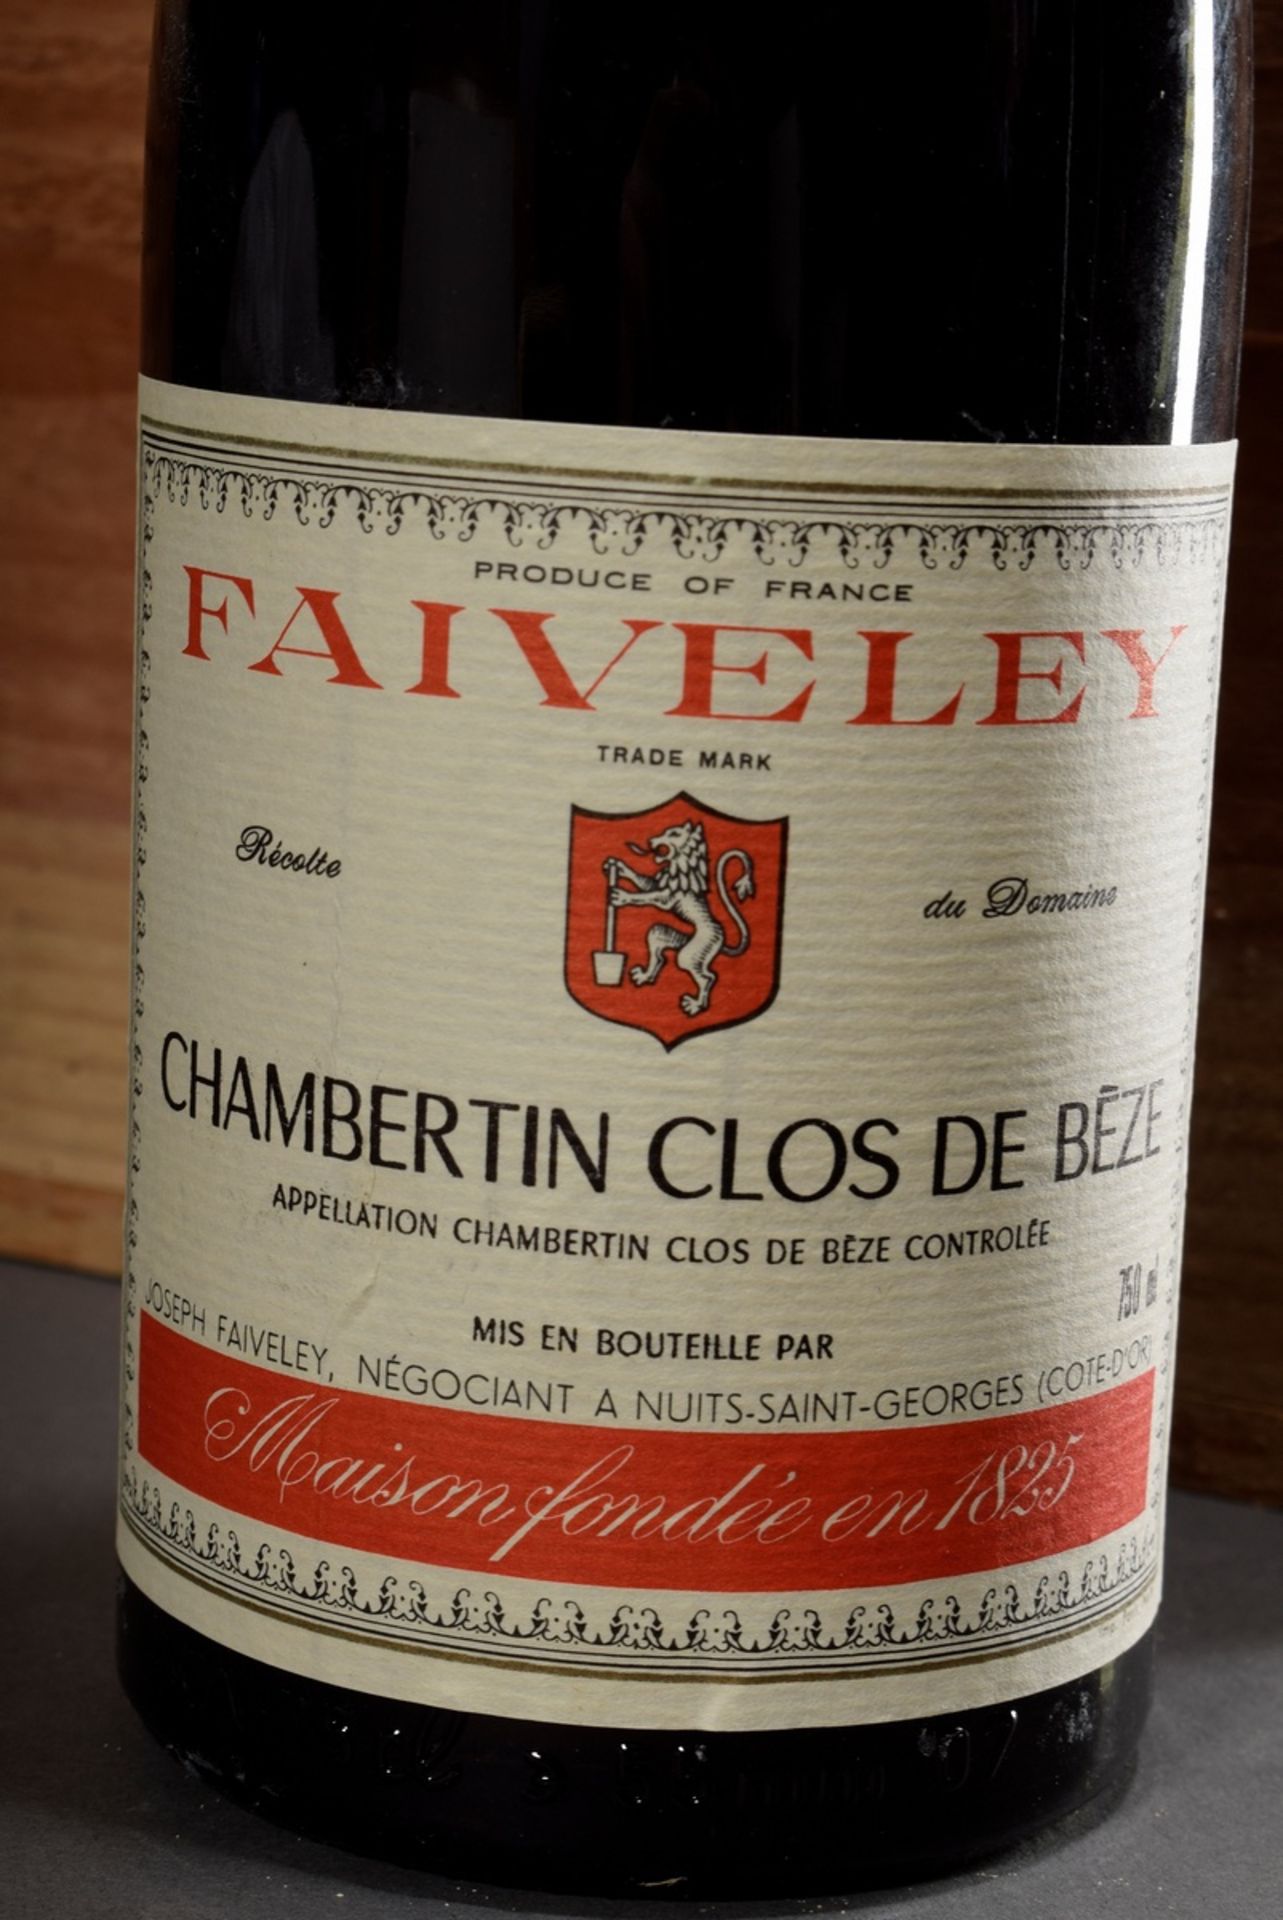 12 bottles 1983 Burgundy red wine "J. F. Chambertin", Clos de Beze, into neck to high fill, 0,75 l. - Image 4 of 11